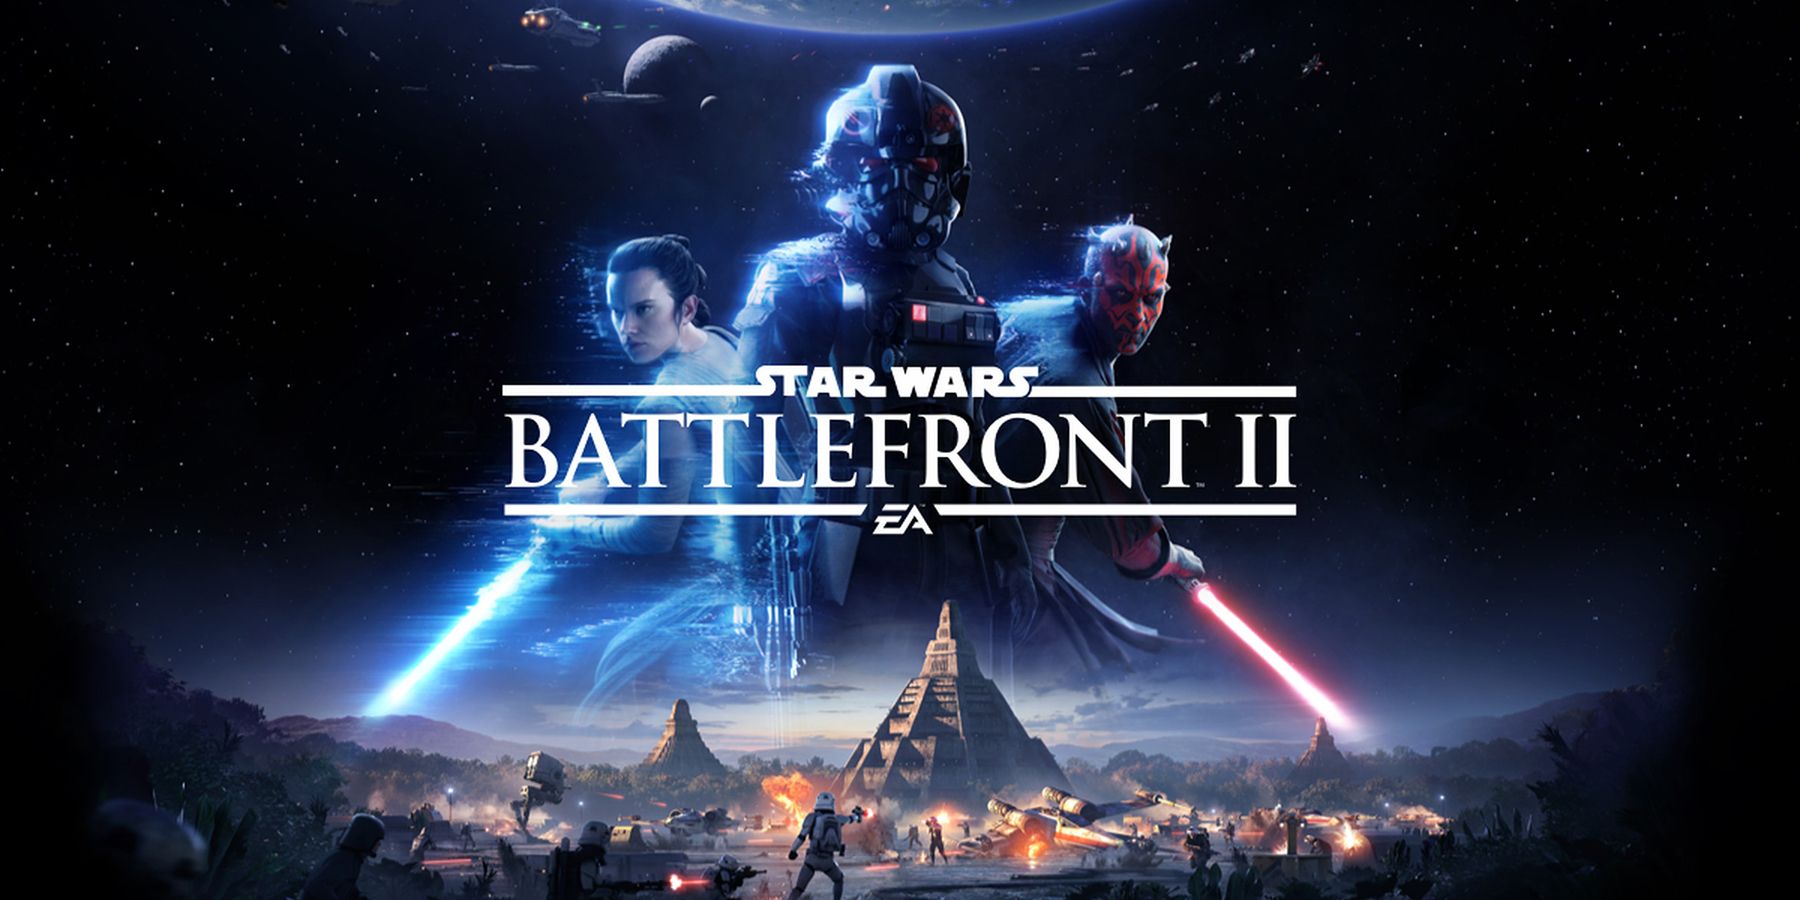 An Imperial pilot, Rey Palpatine, and Darth Maul stand in front of the game title as a battle rages around them